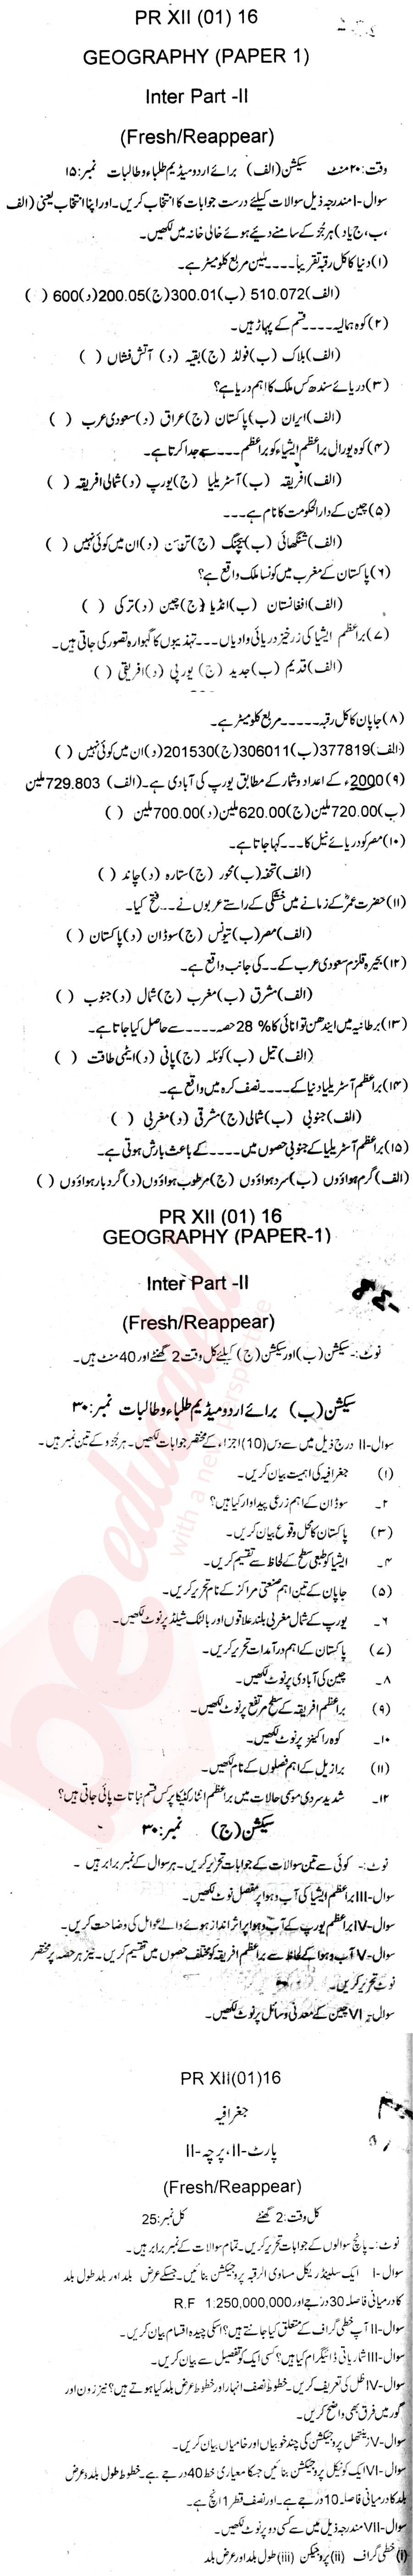 Commercial Geography FA Part 2 Past Paper Group 1 BISE Abbottabad 2016